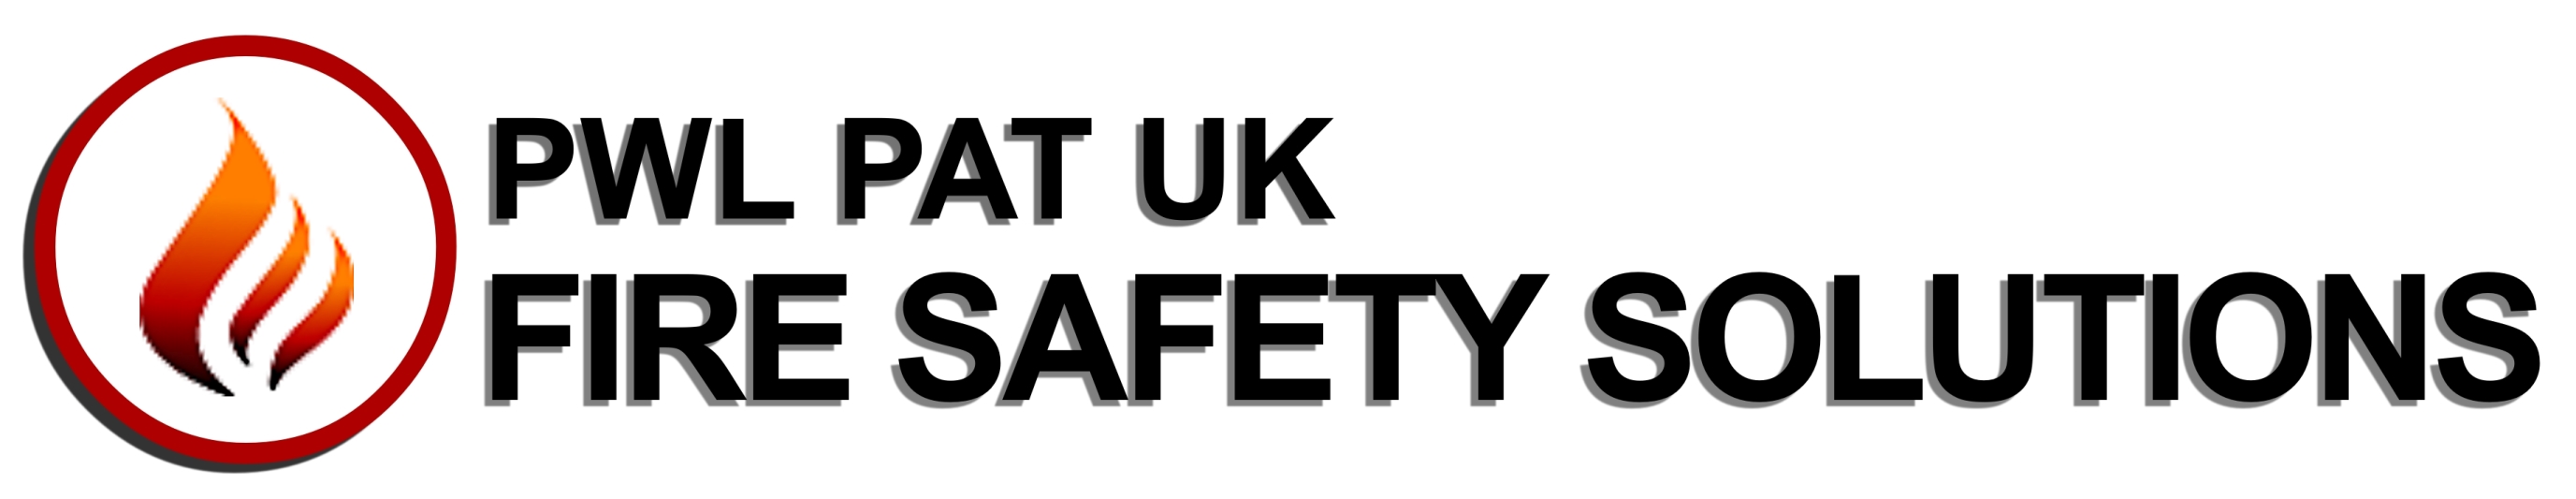 PWL PAT UK Fire Safety Solutions